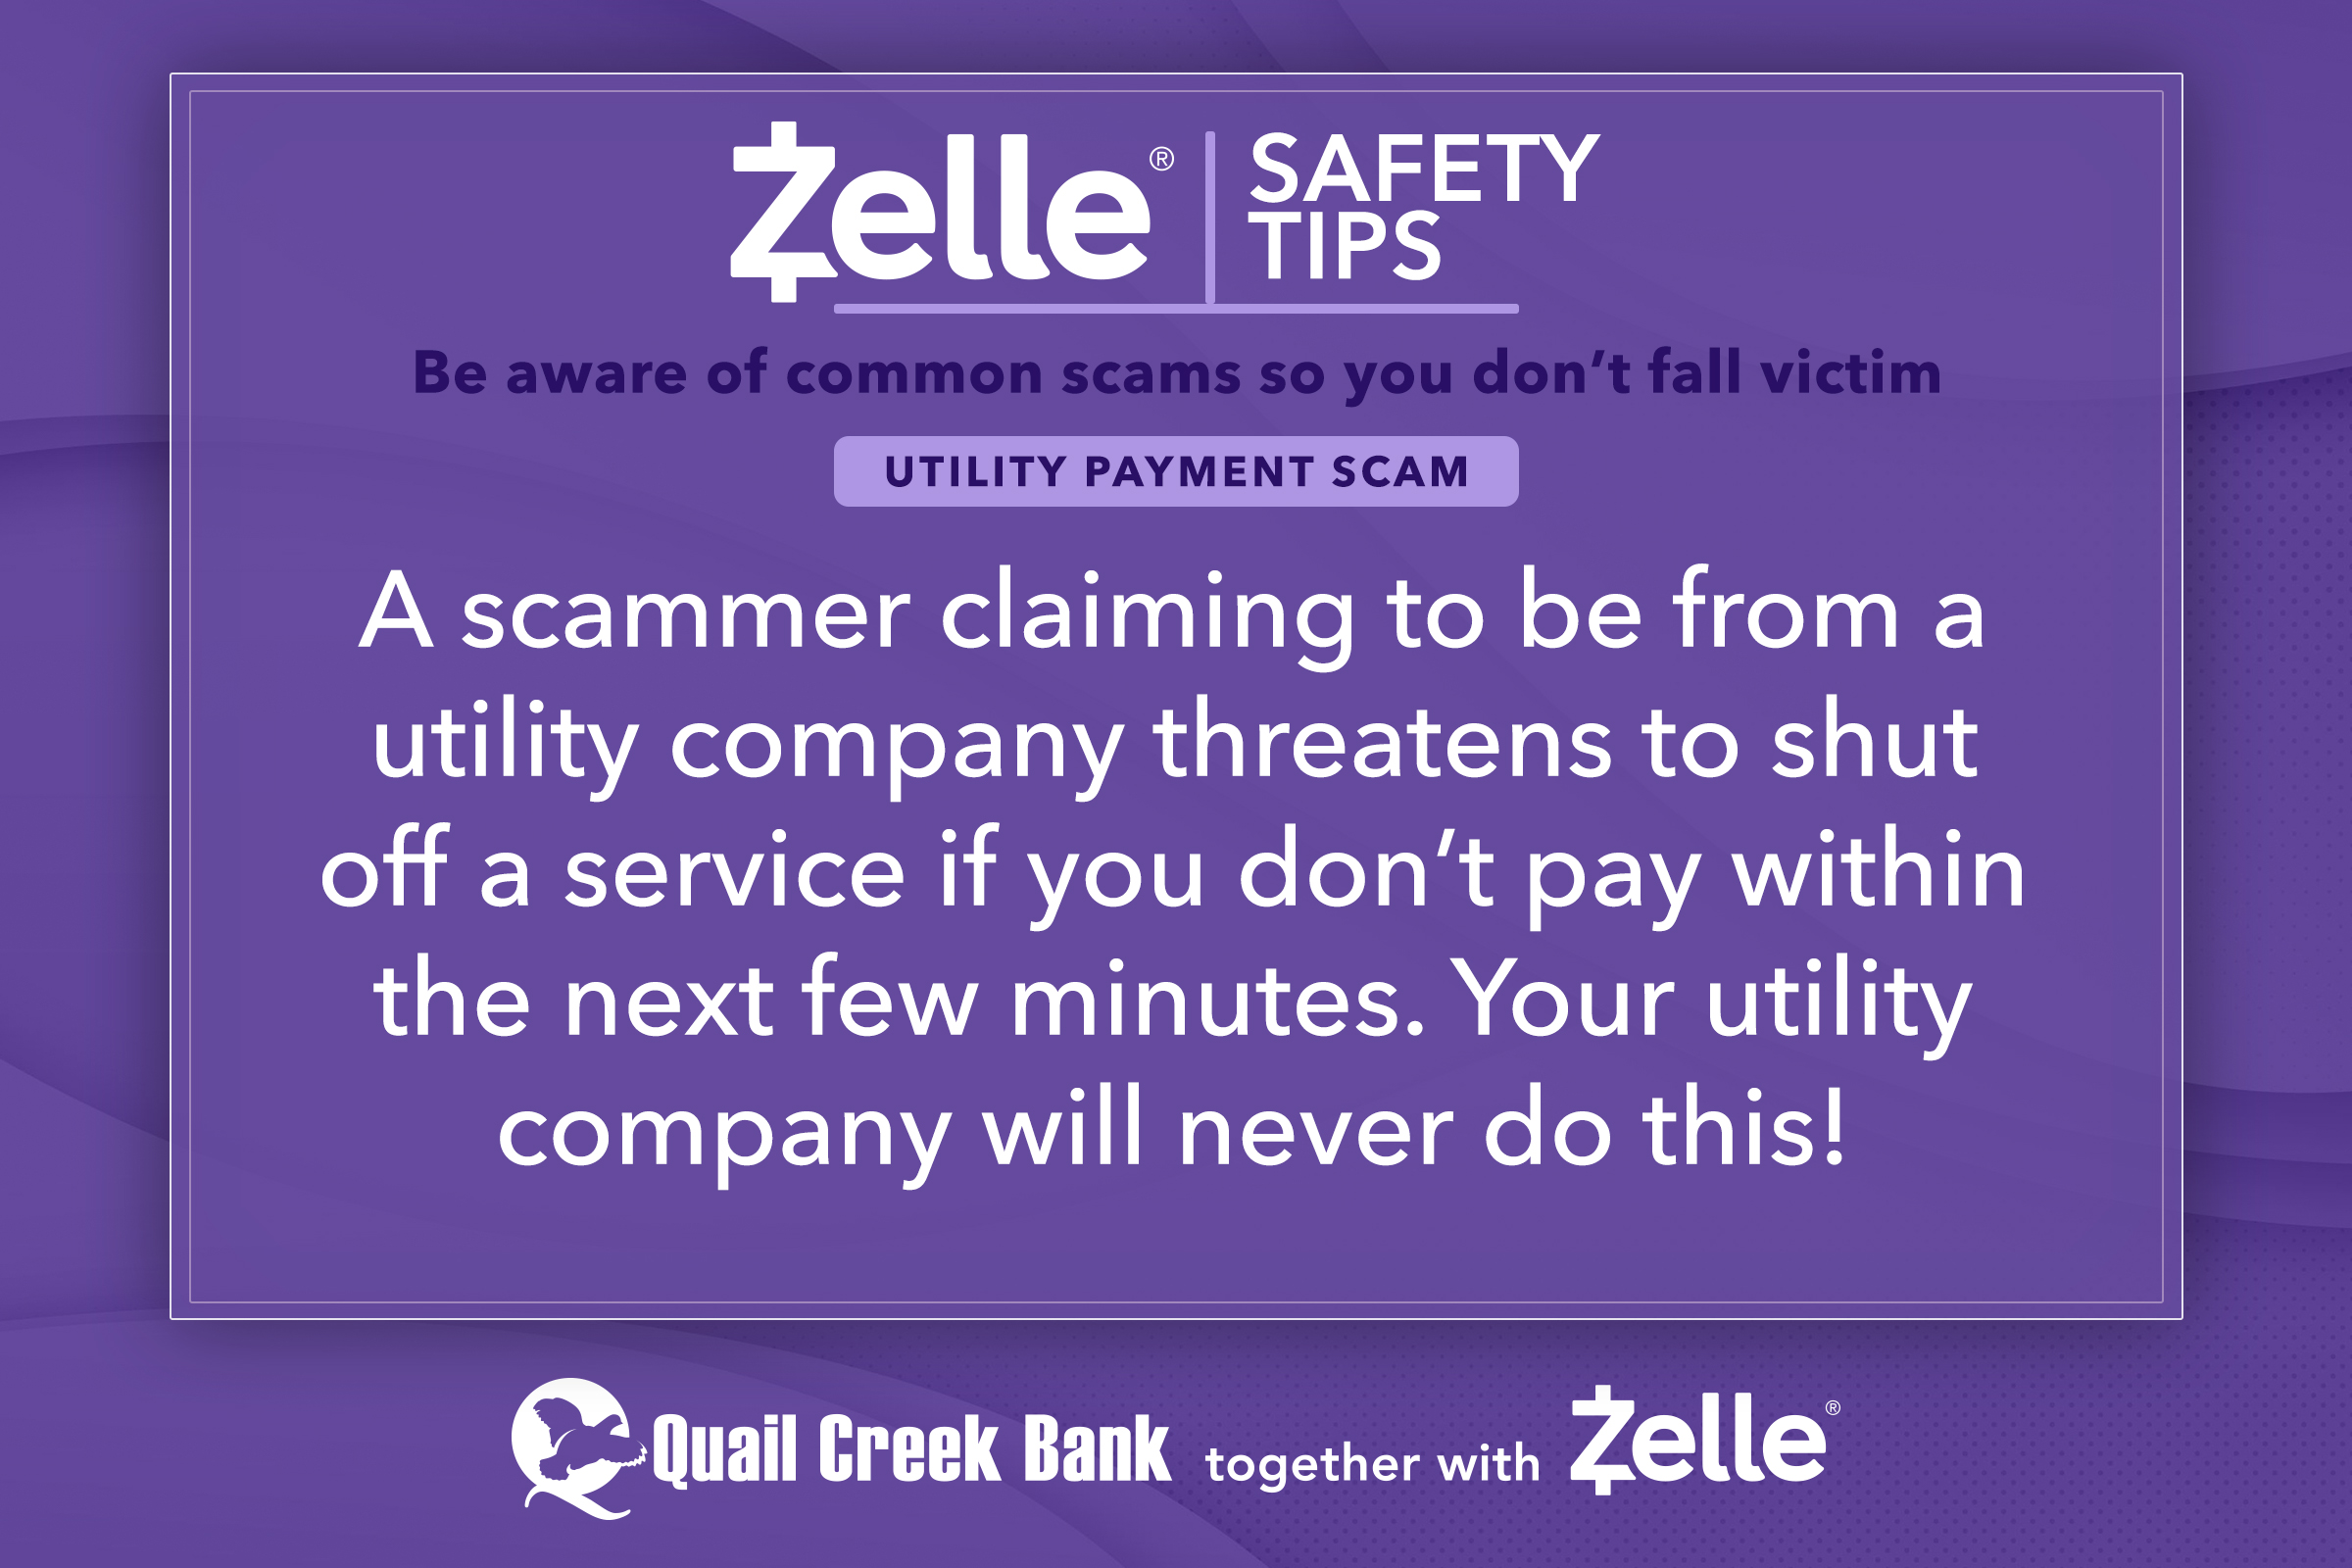 Zelle Safety Tips - Utility Payment Scam